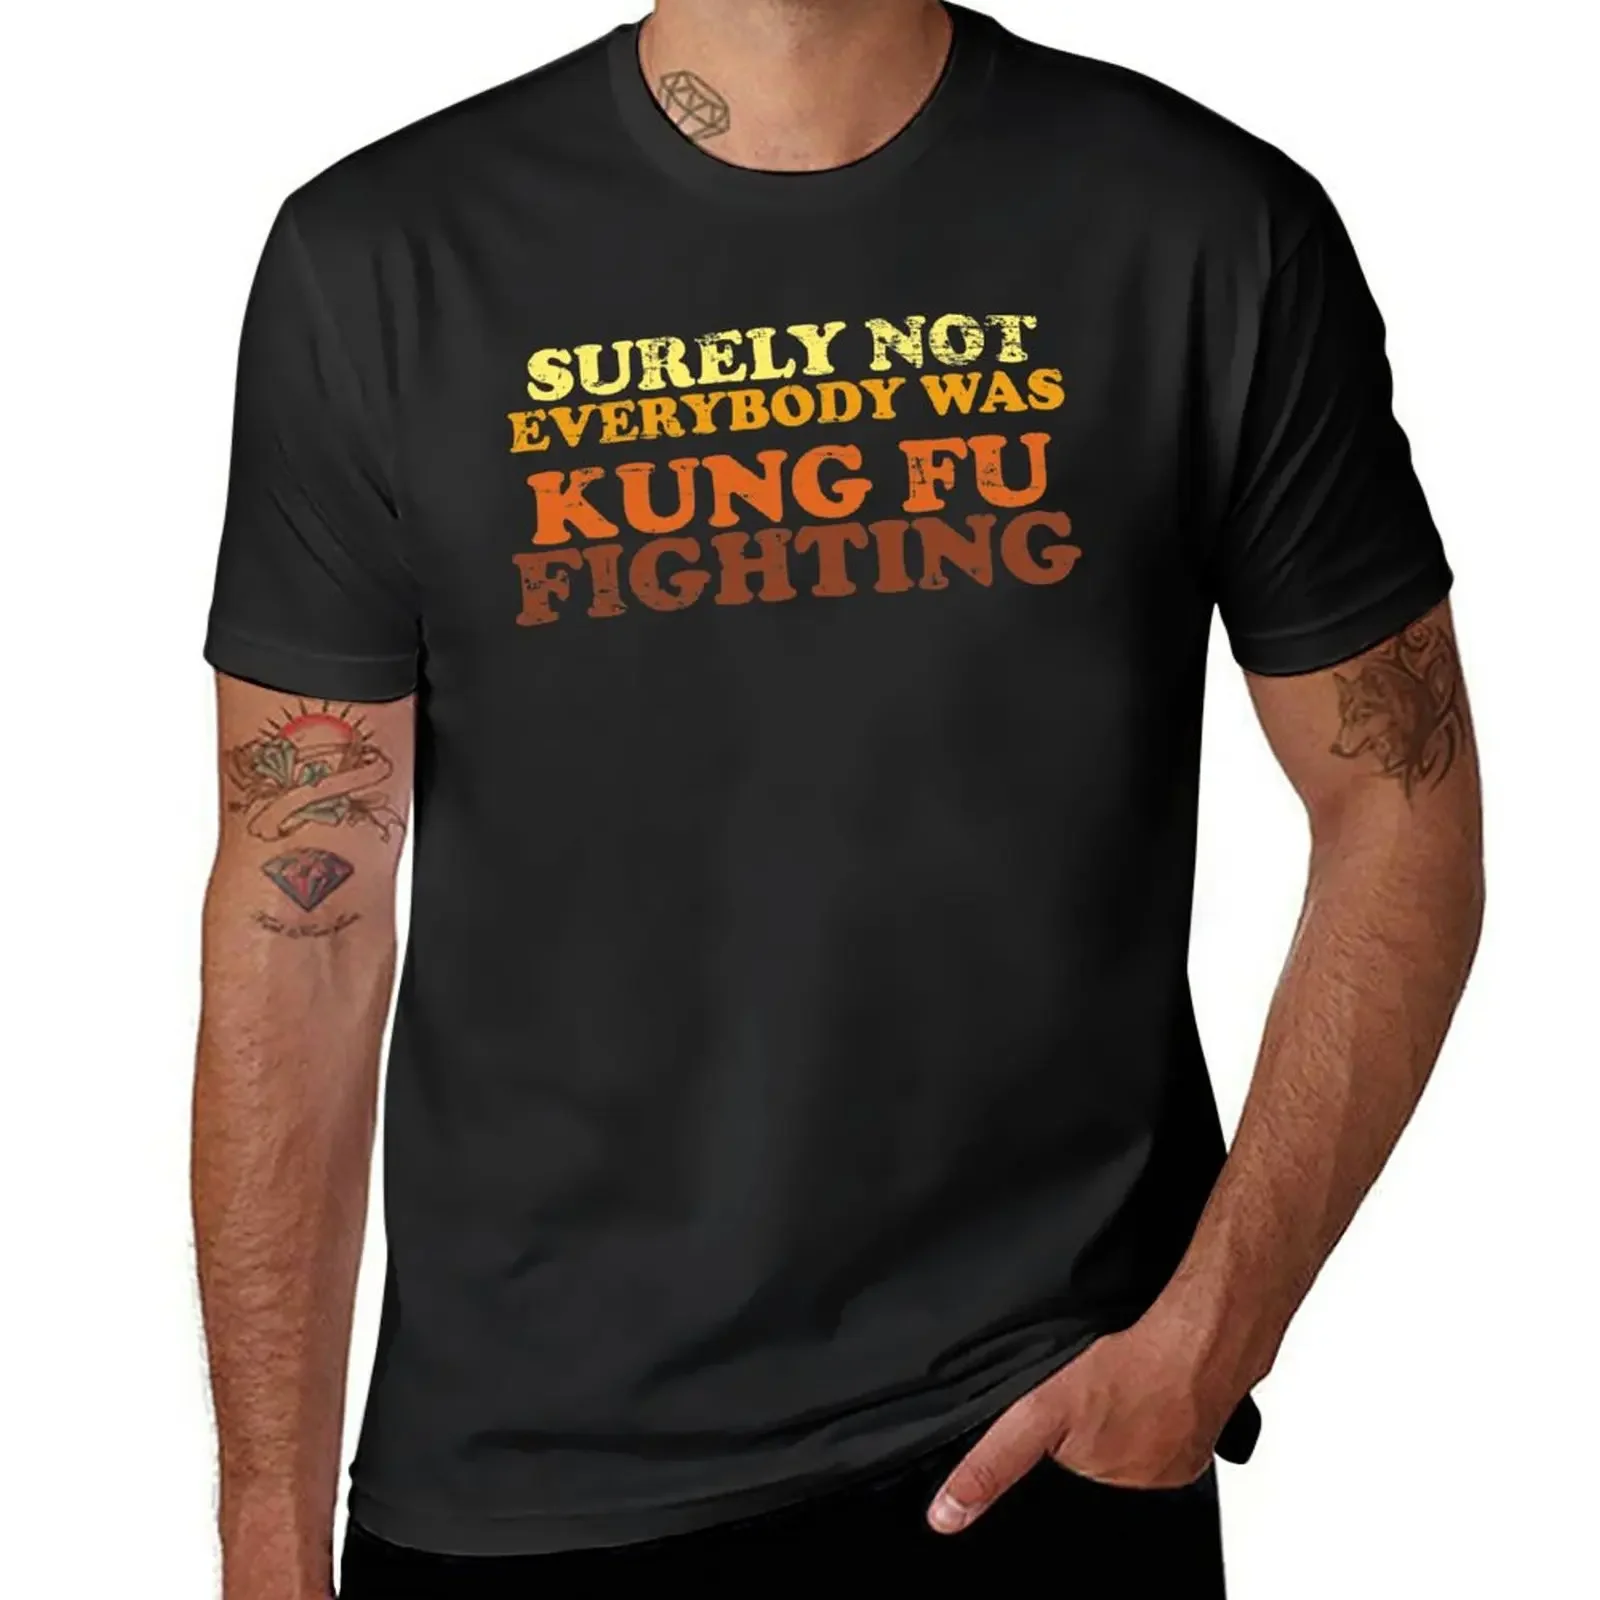 

Surely Not Everybody Was Kung Fu Fighting T-Shirt vintage clothes customs design your own plus size tops Men's cotton t-shirt